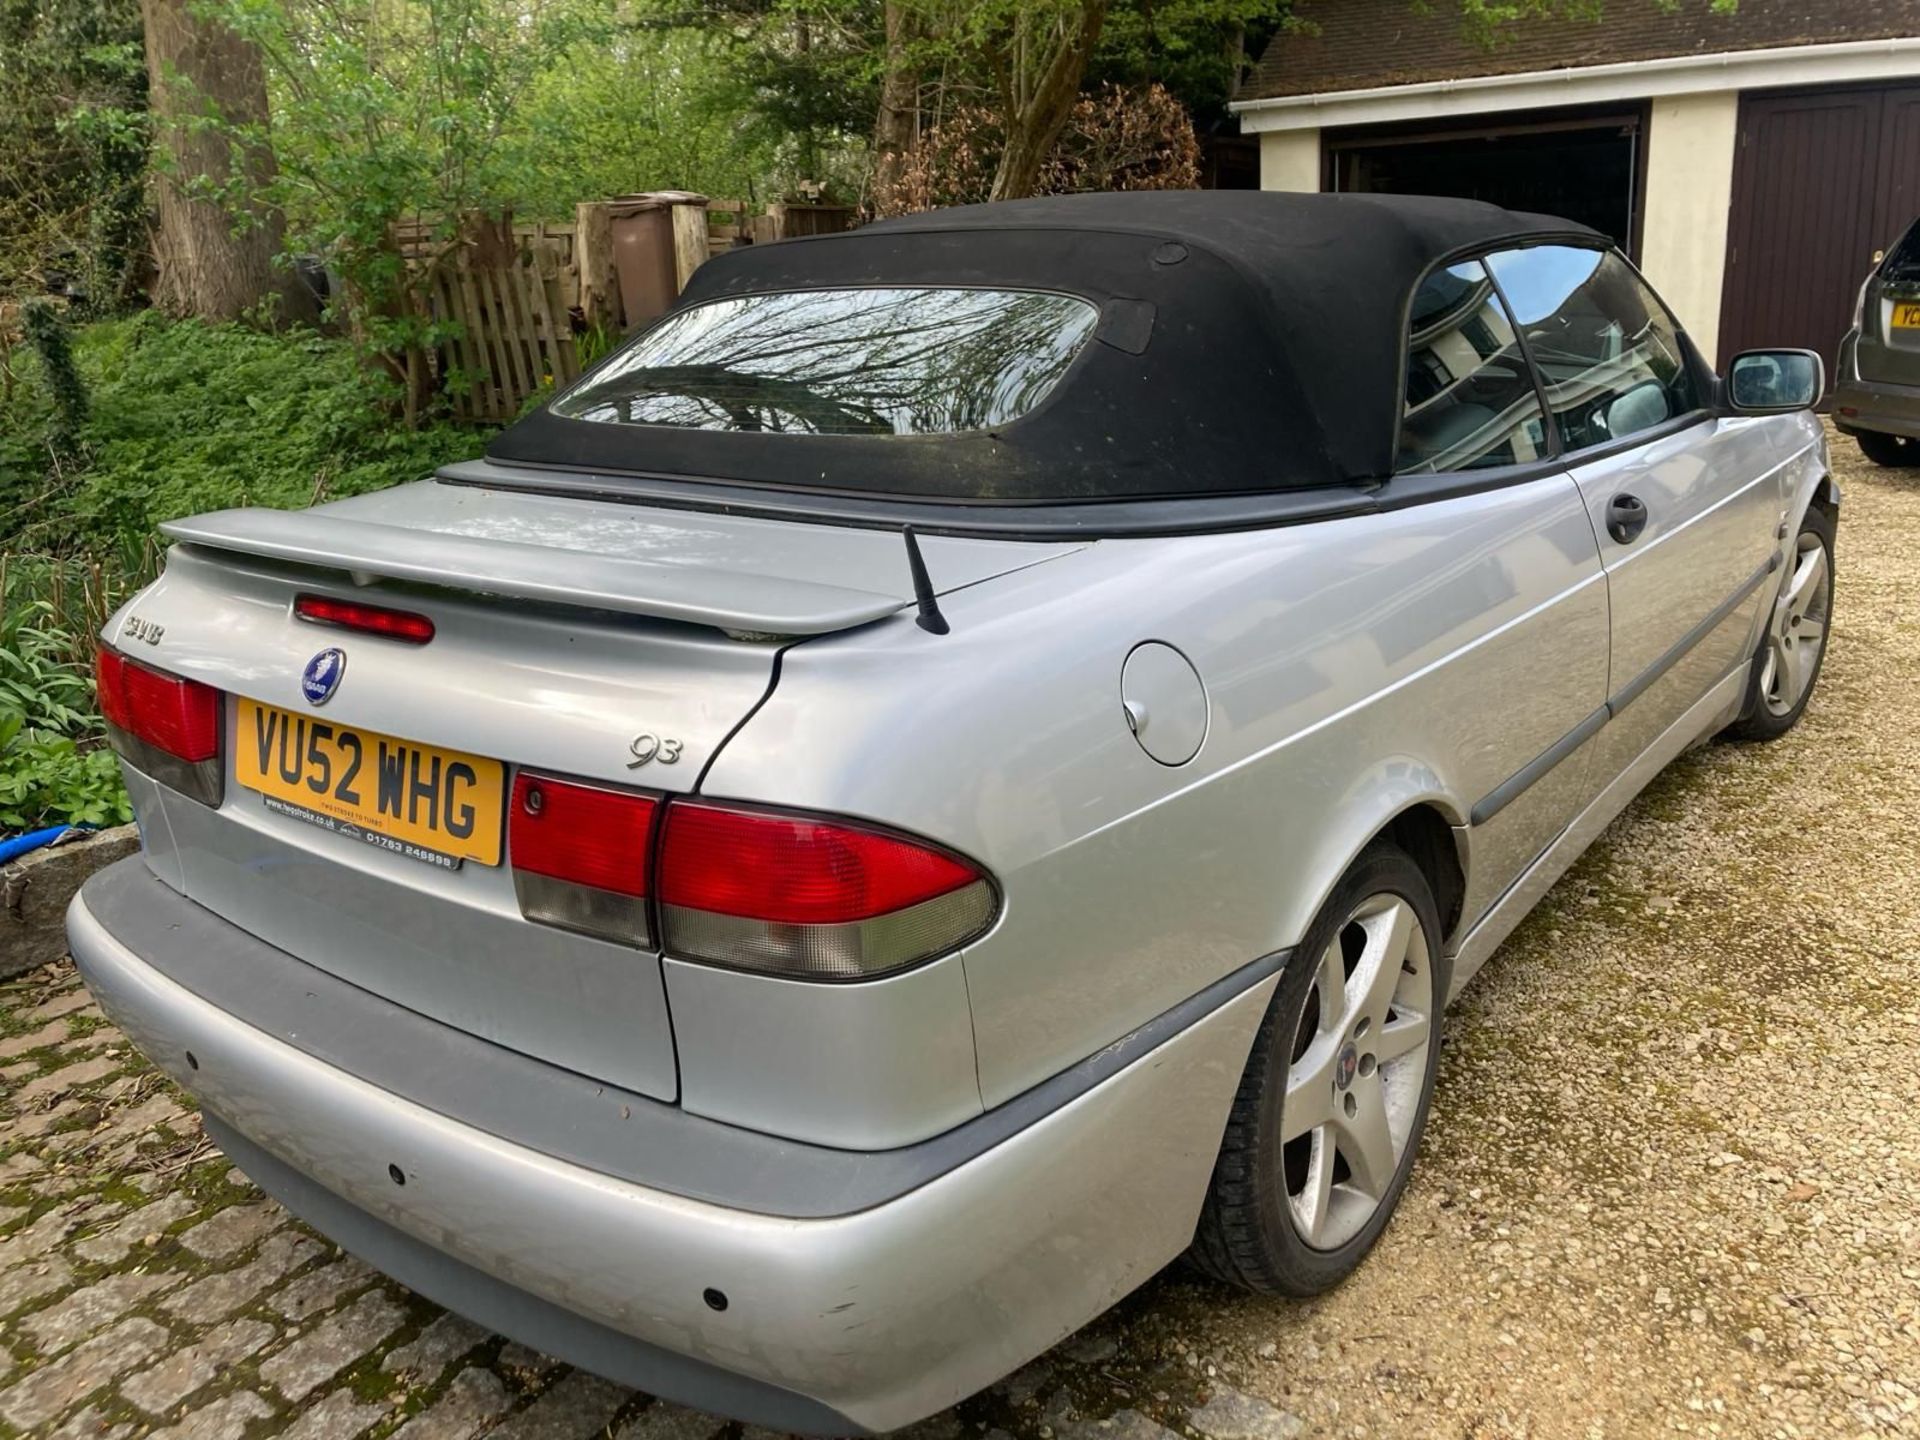 2002 Saab 9-3 Aero Convertible with 11 months MOT - Offered at No Reserve - Image 11 of 24